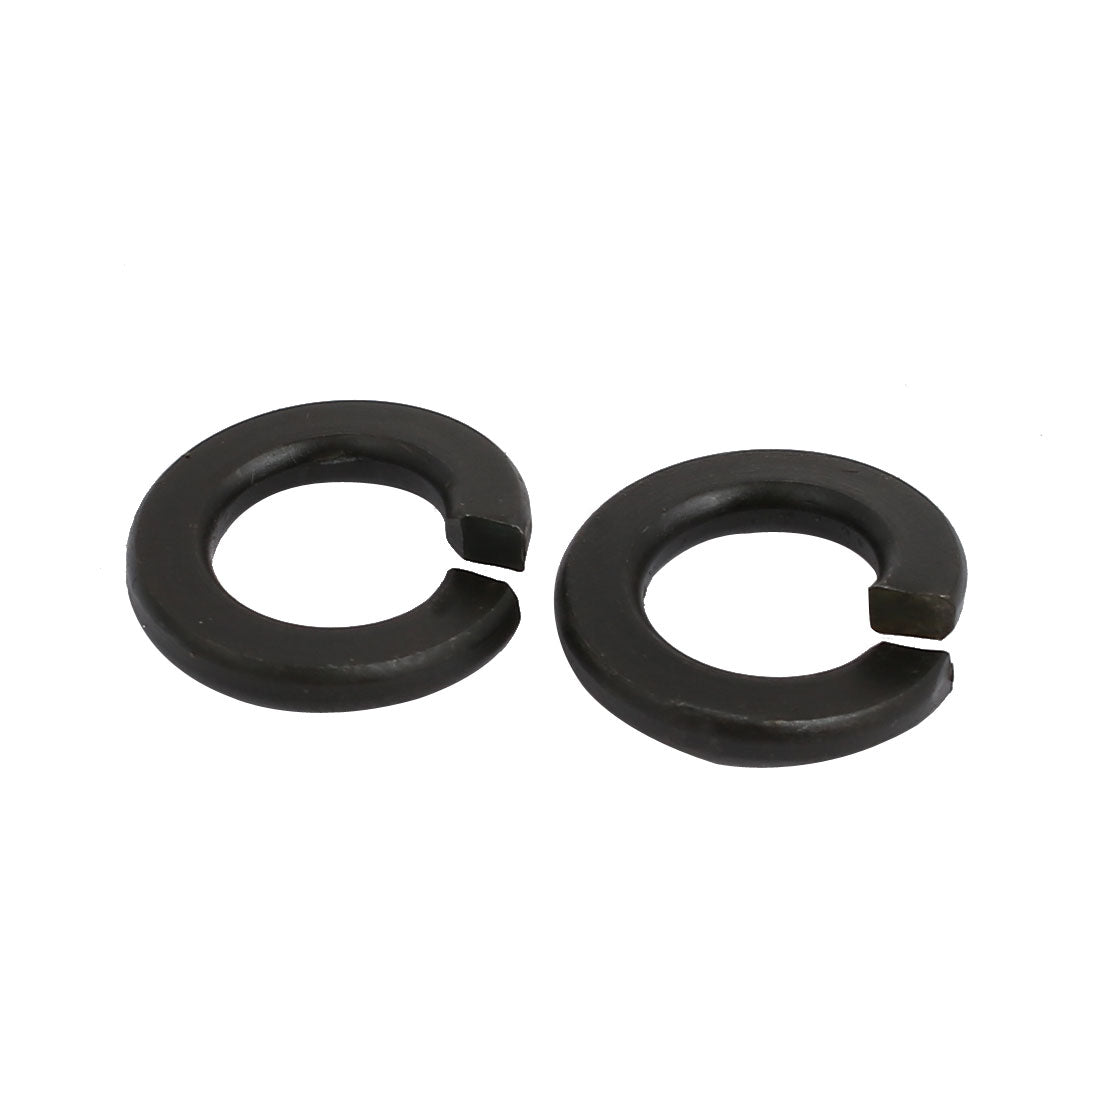 uxcell Uxcell 50pcs 3/8-inch Inner Dia Carbon Steel Split Lock Spring Washer Gasket Black